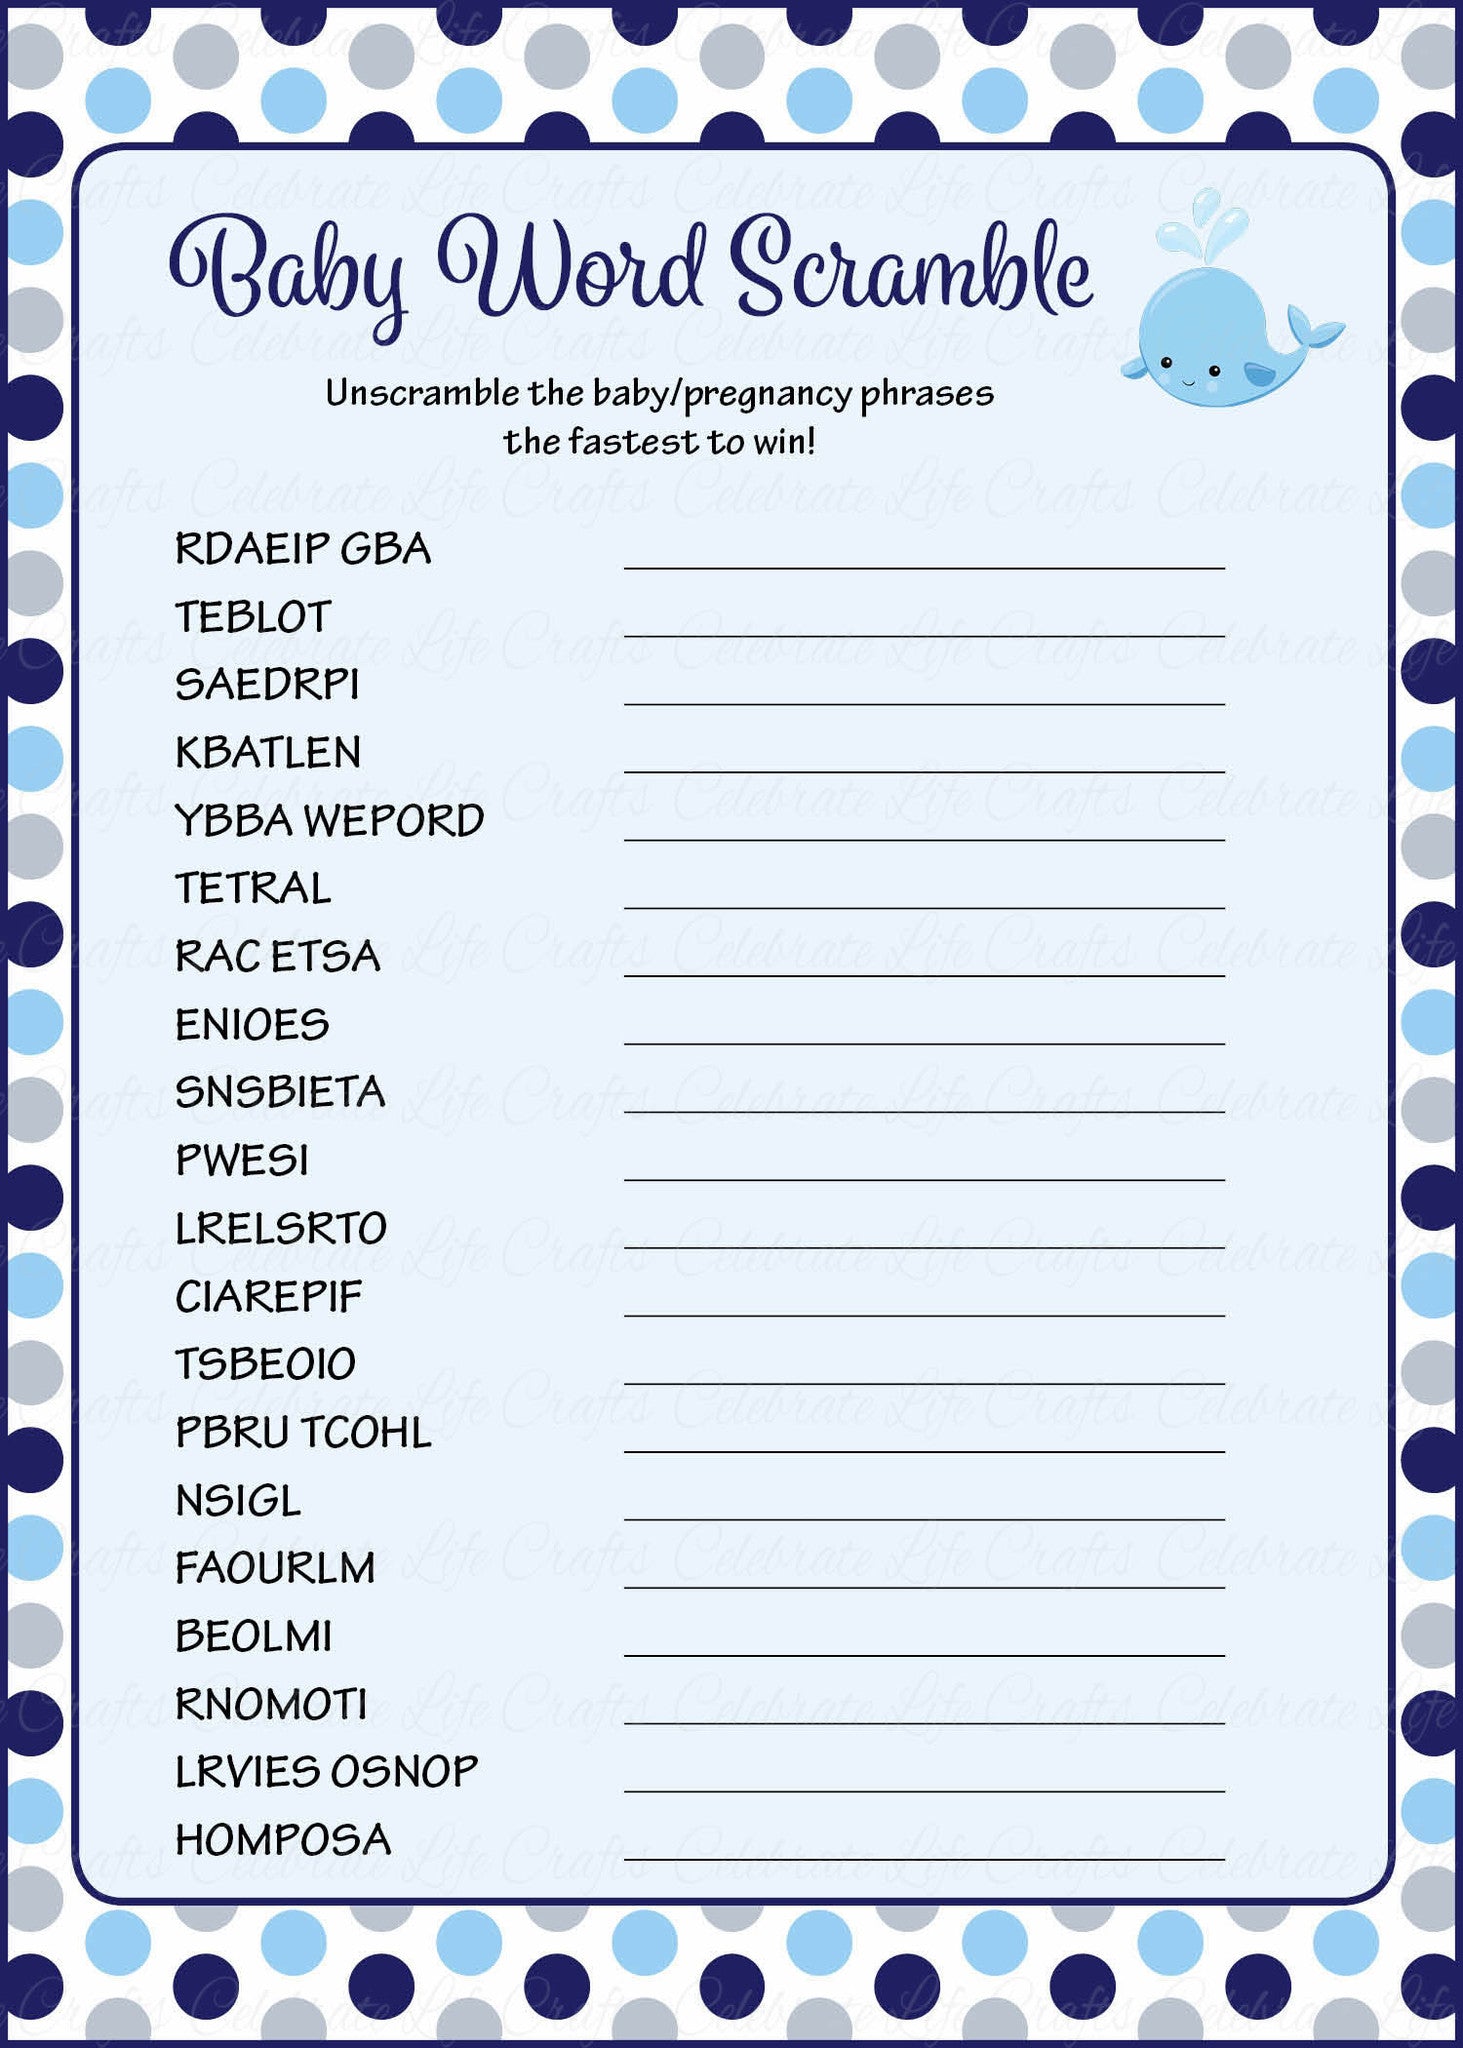 word-scramble-baby-shower-game-whale-baby-shower-theme-for-baby-boy